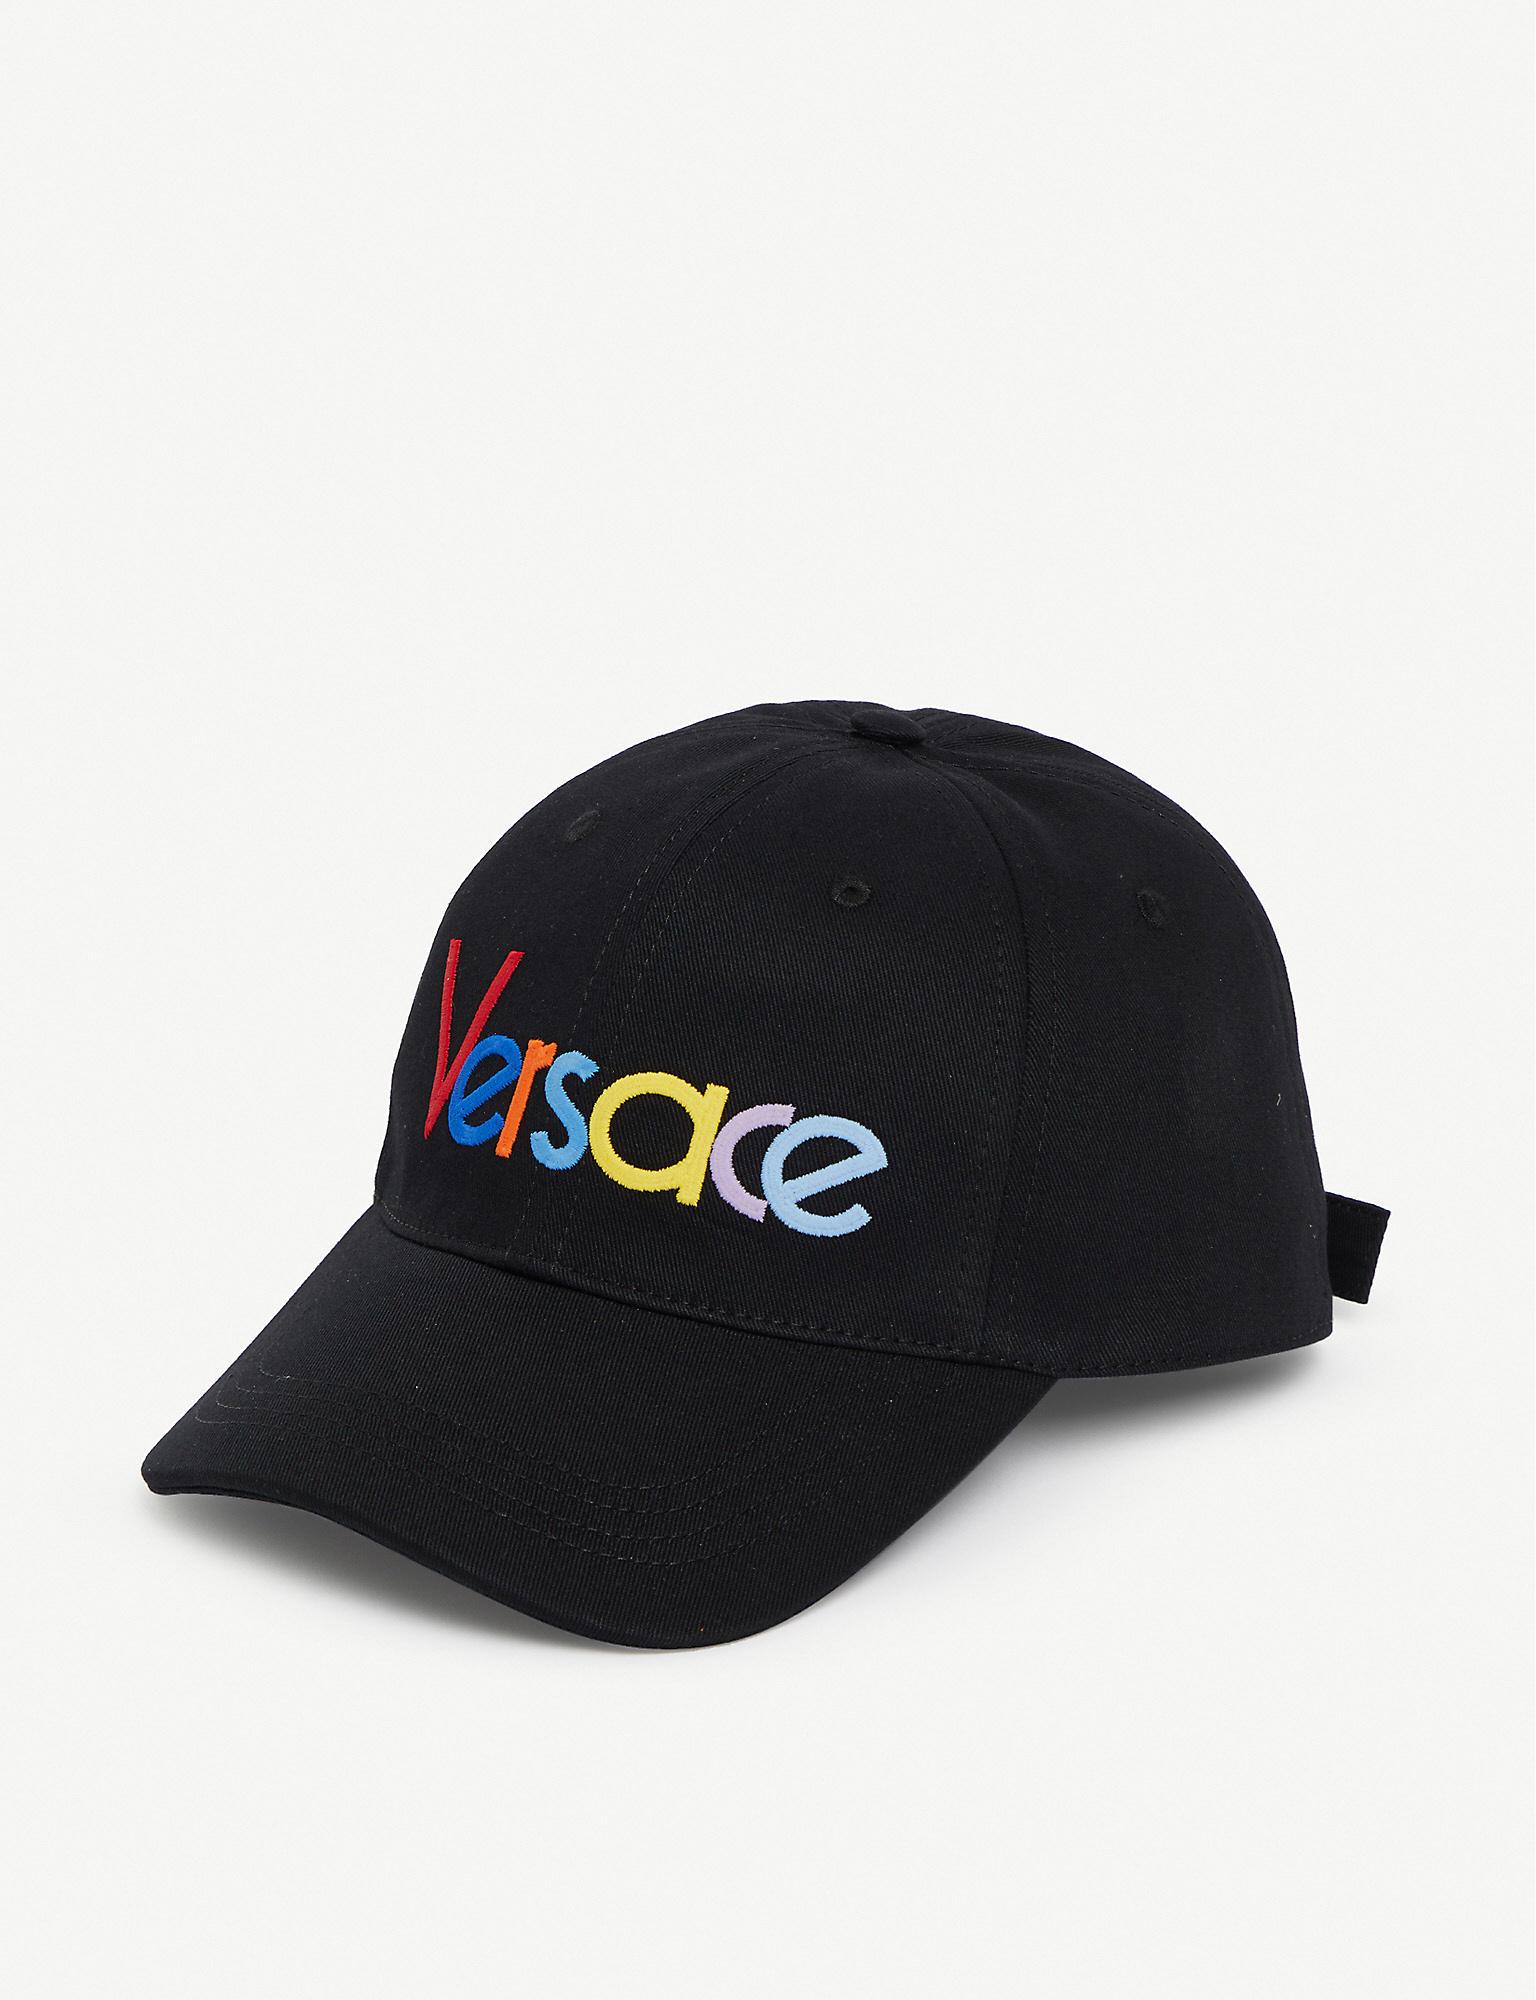 Versace Logo-embroidered Cotton Baseball Cap in Black for Men - Lyst